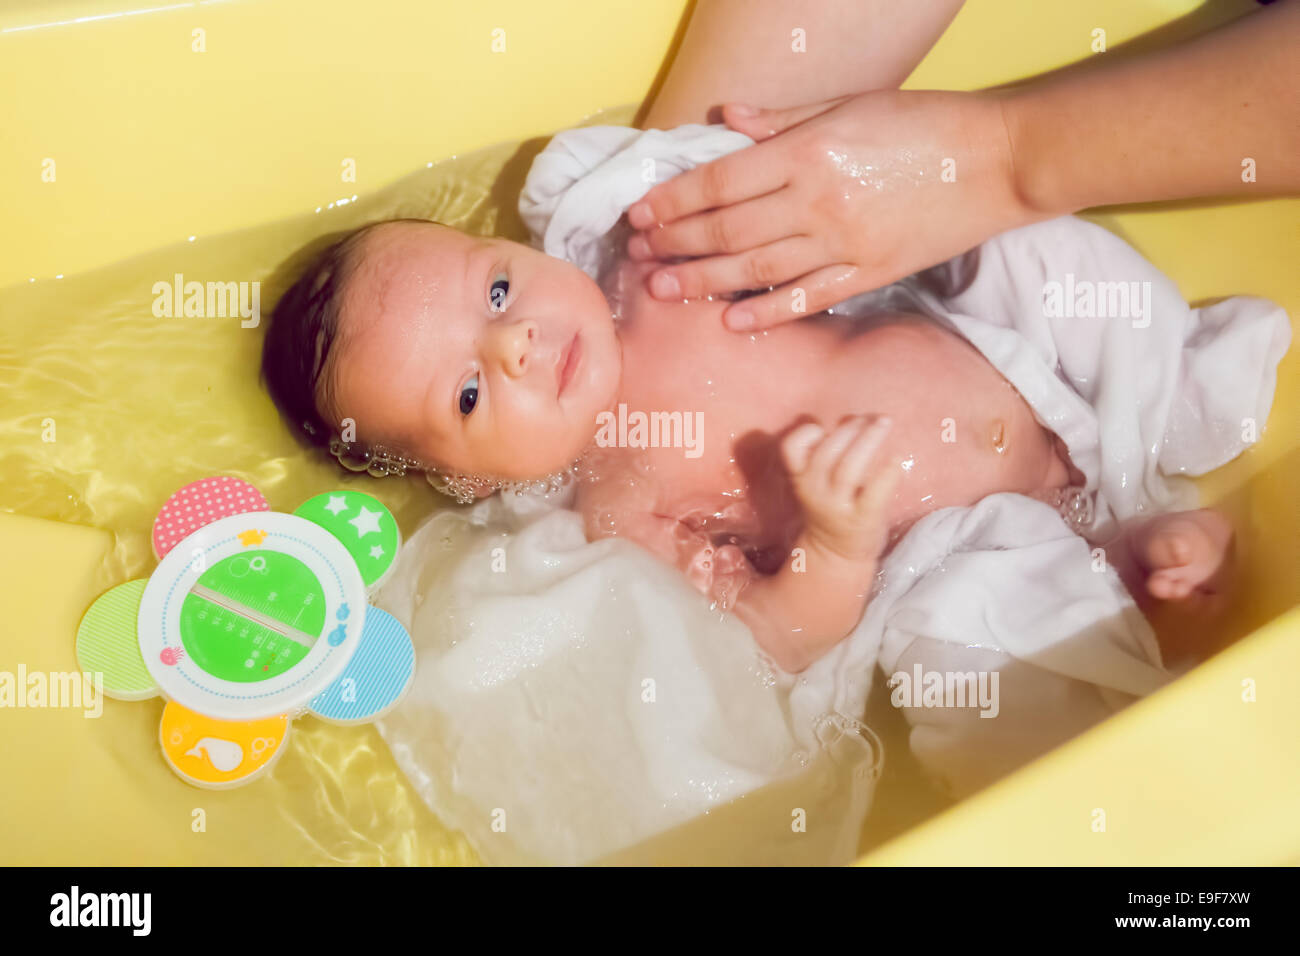 New born baby is receiving a bath from his mommy Stock Photo - Alamy